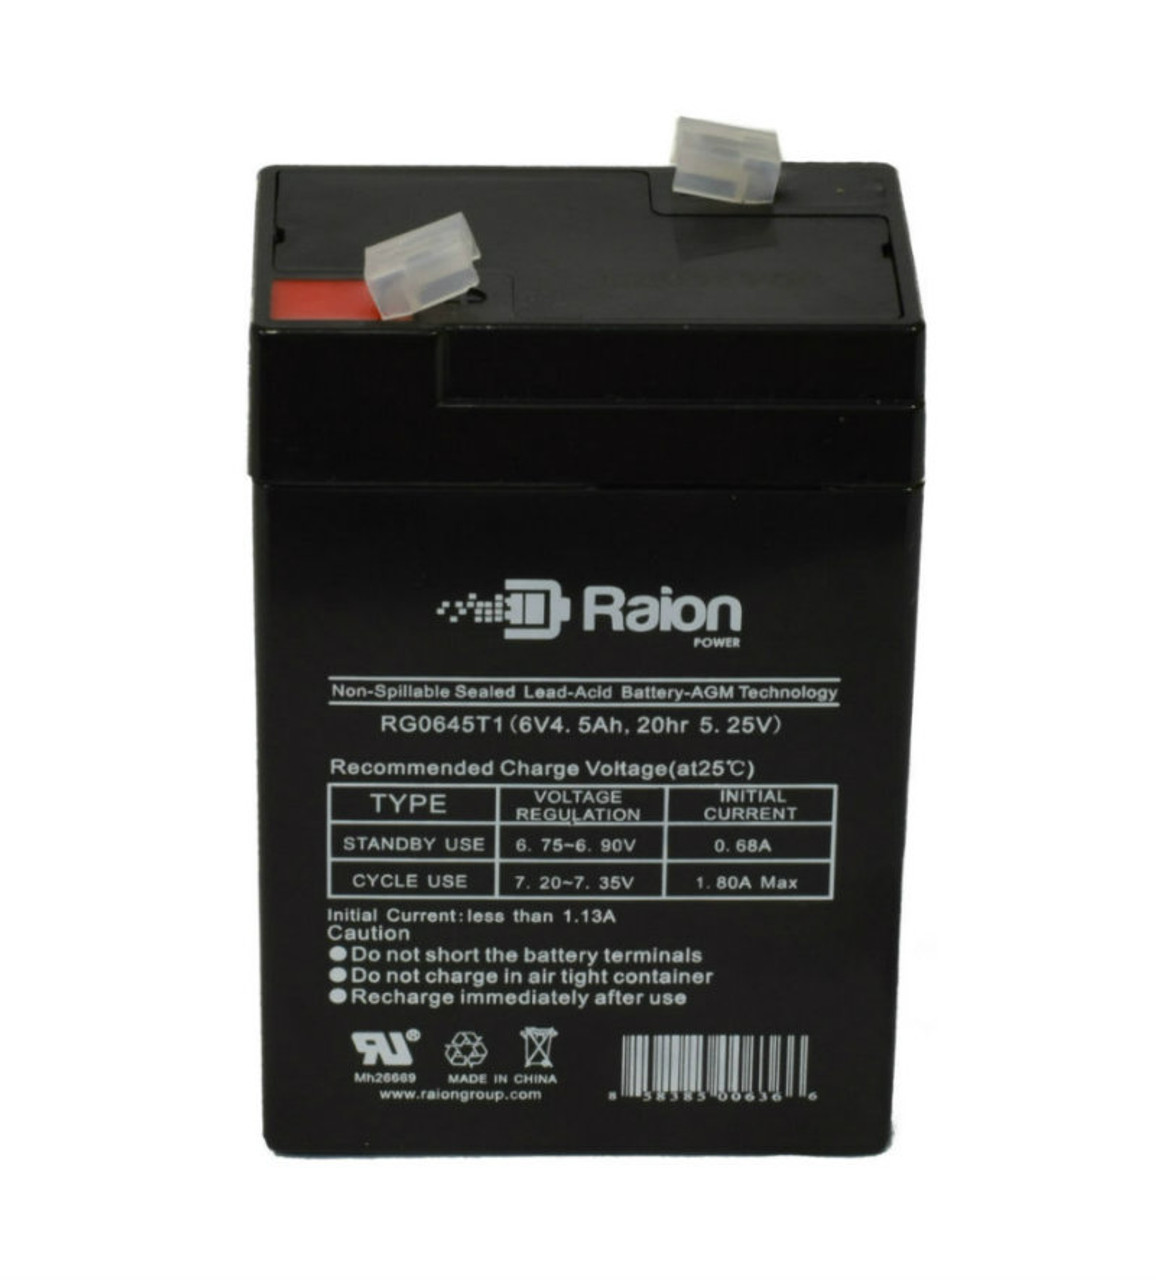 Raion Power RG0645T1 Replacement Battery Cartridge for Tianchang TC6-6